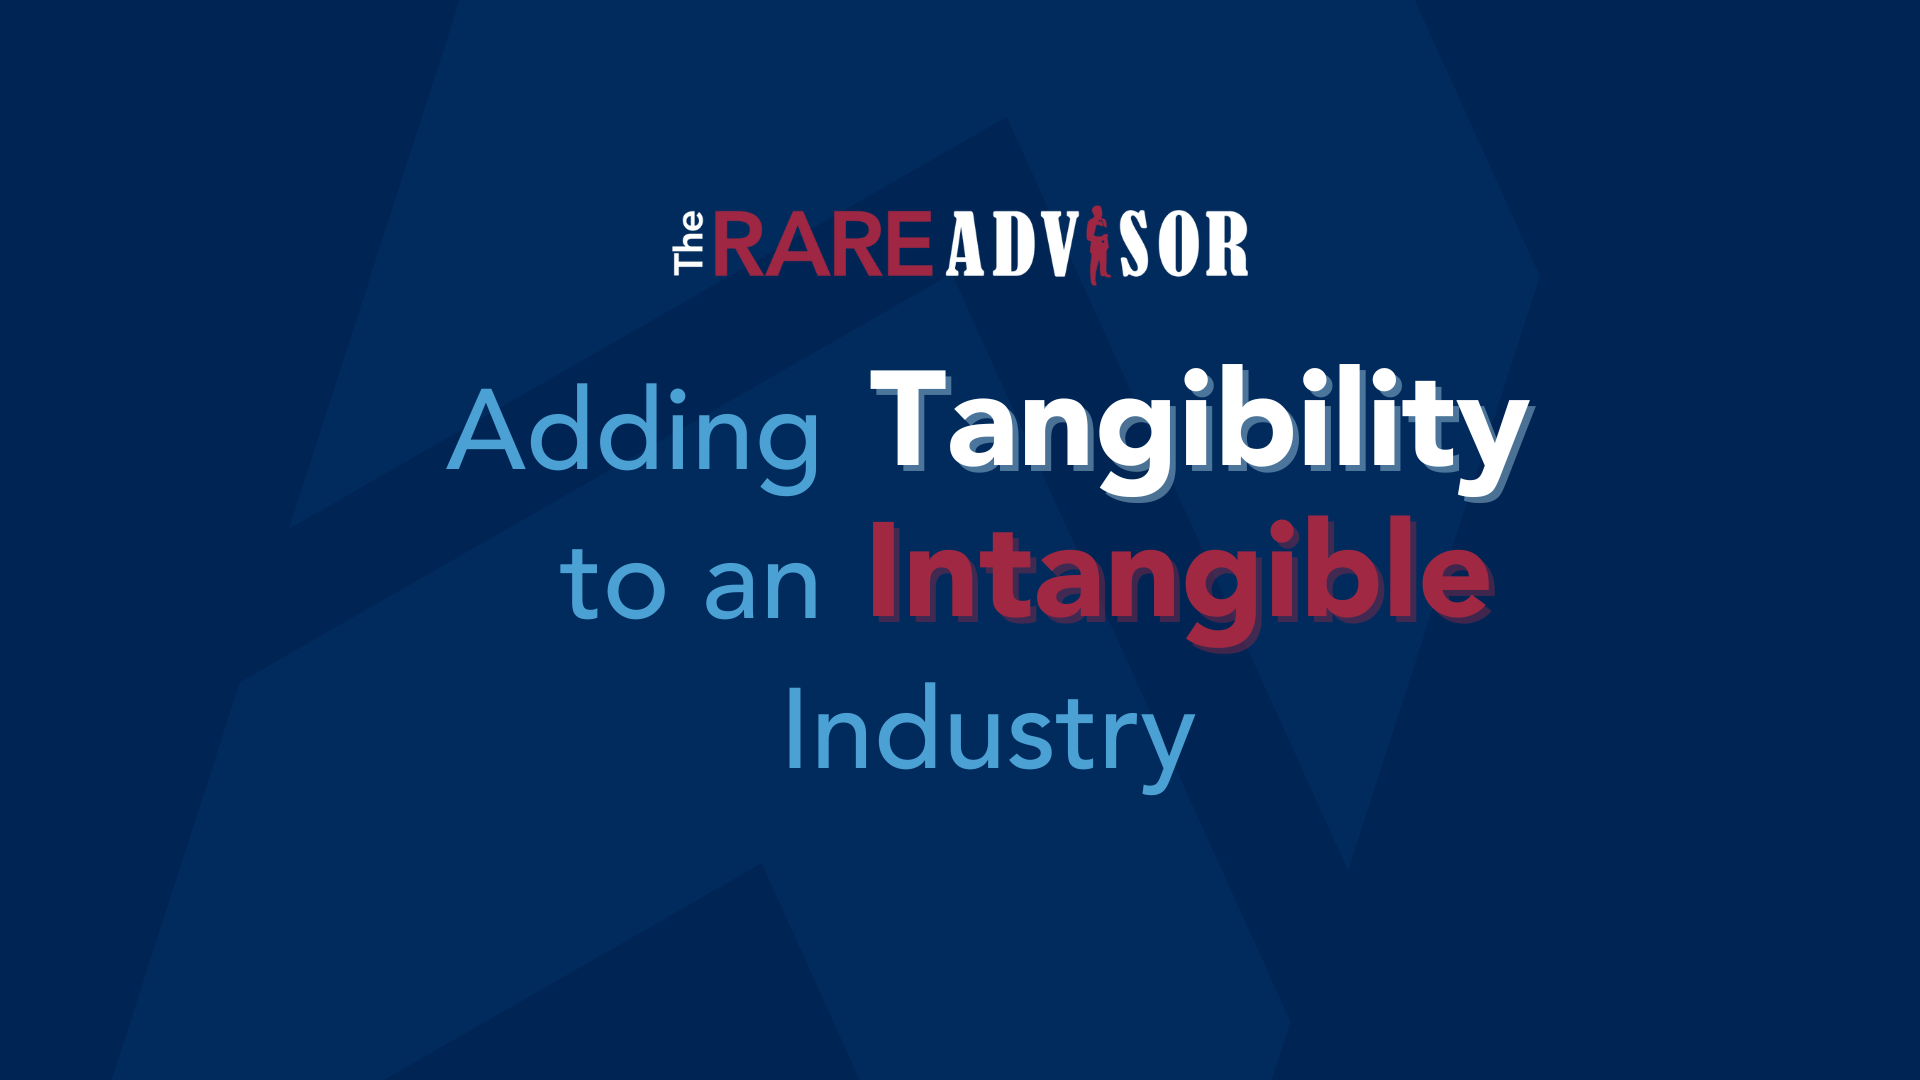 The RARE Advisor: Adding Tangibility to an Intangible Industry